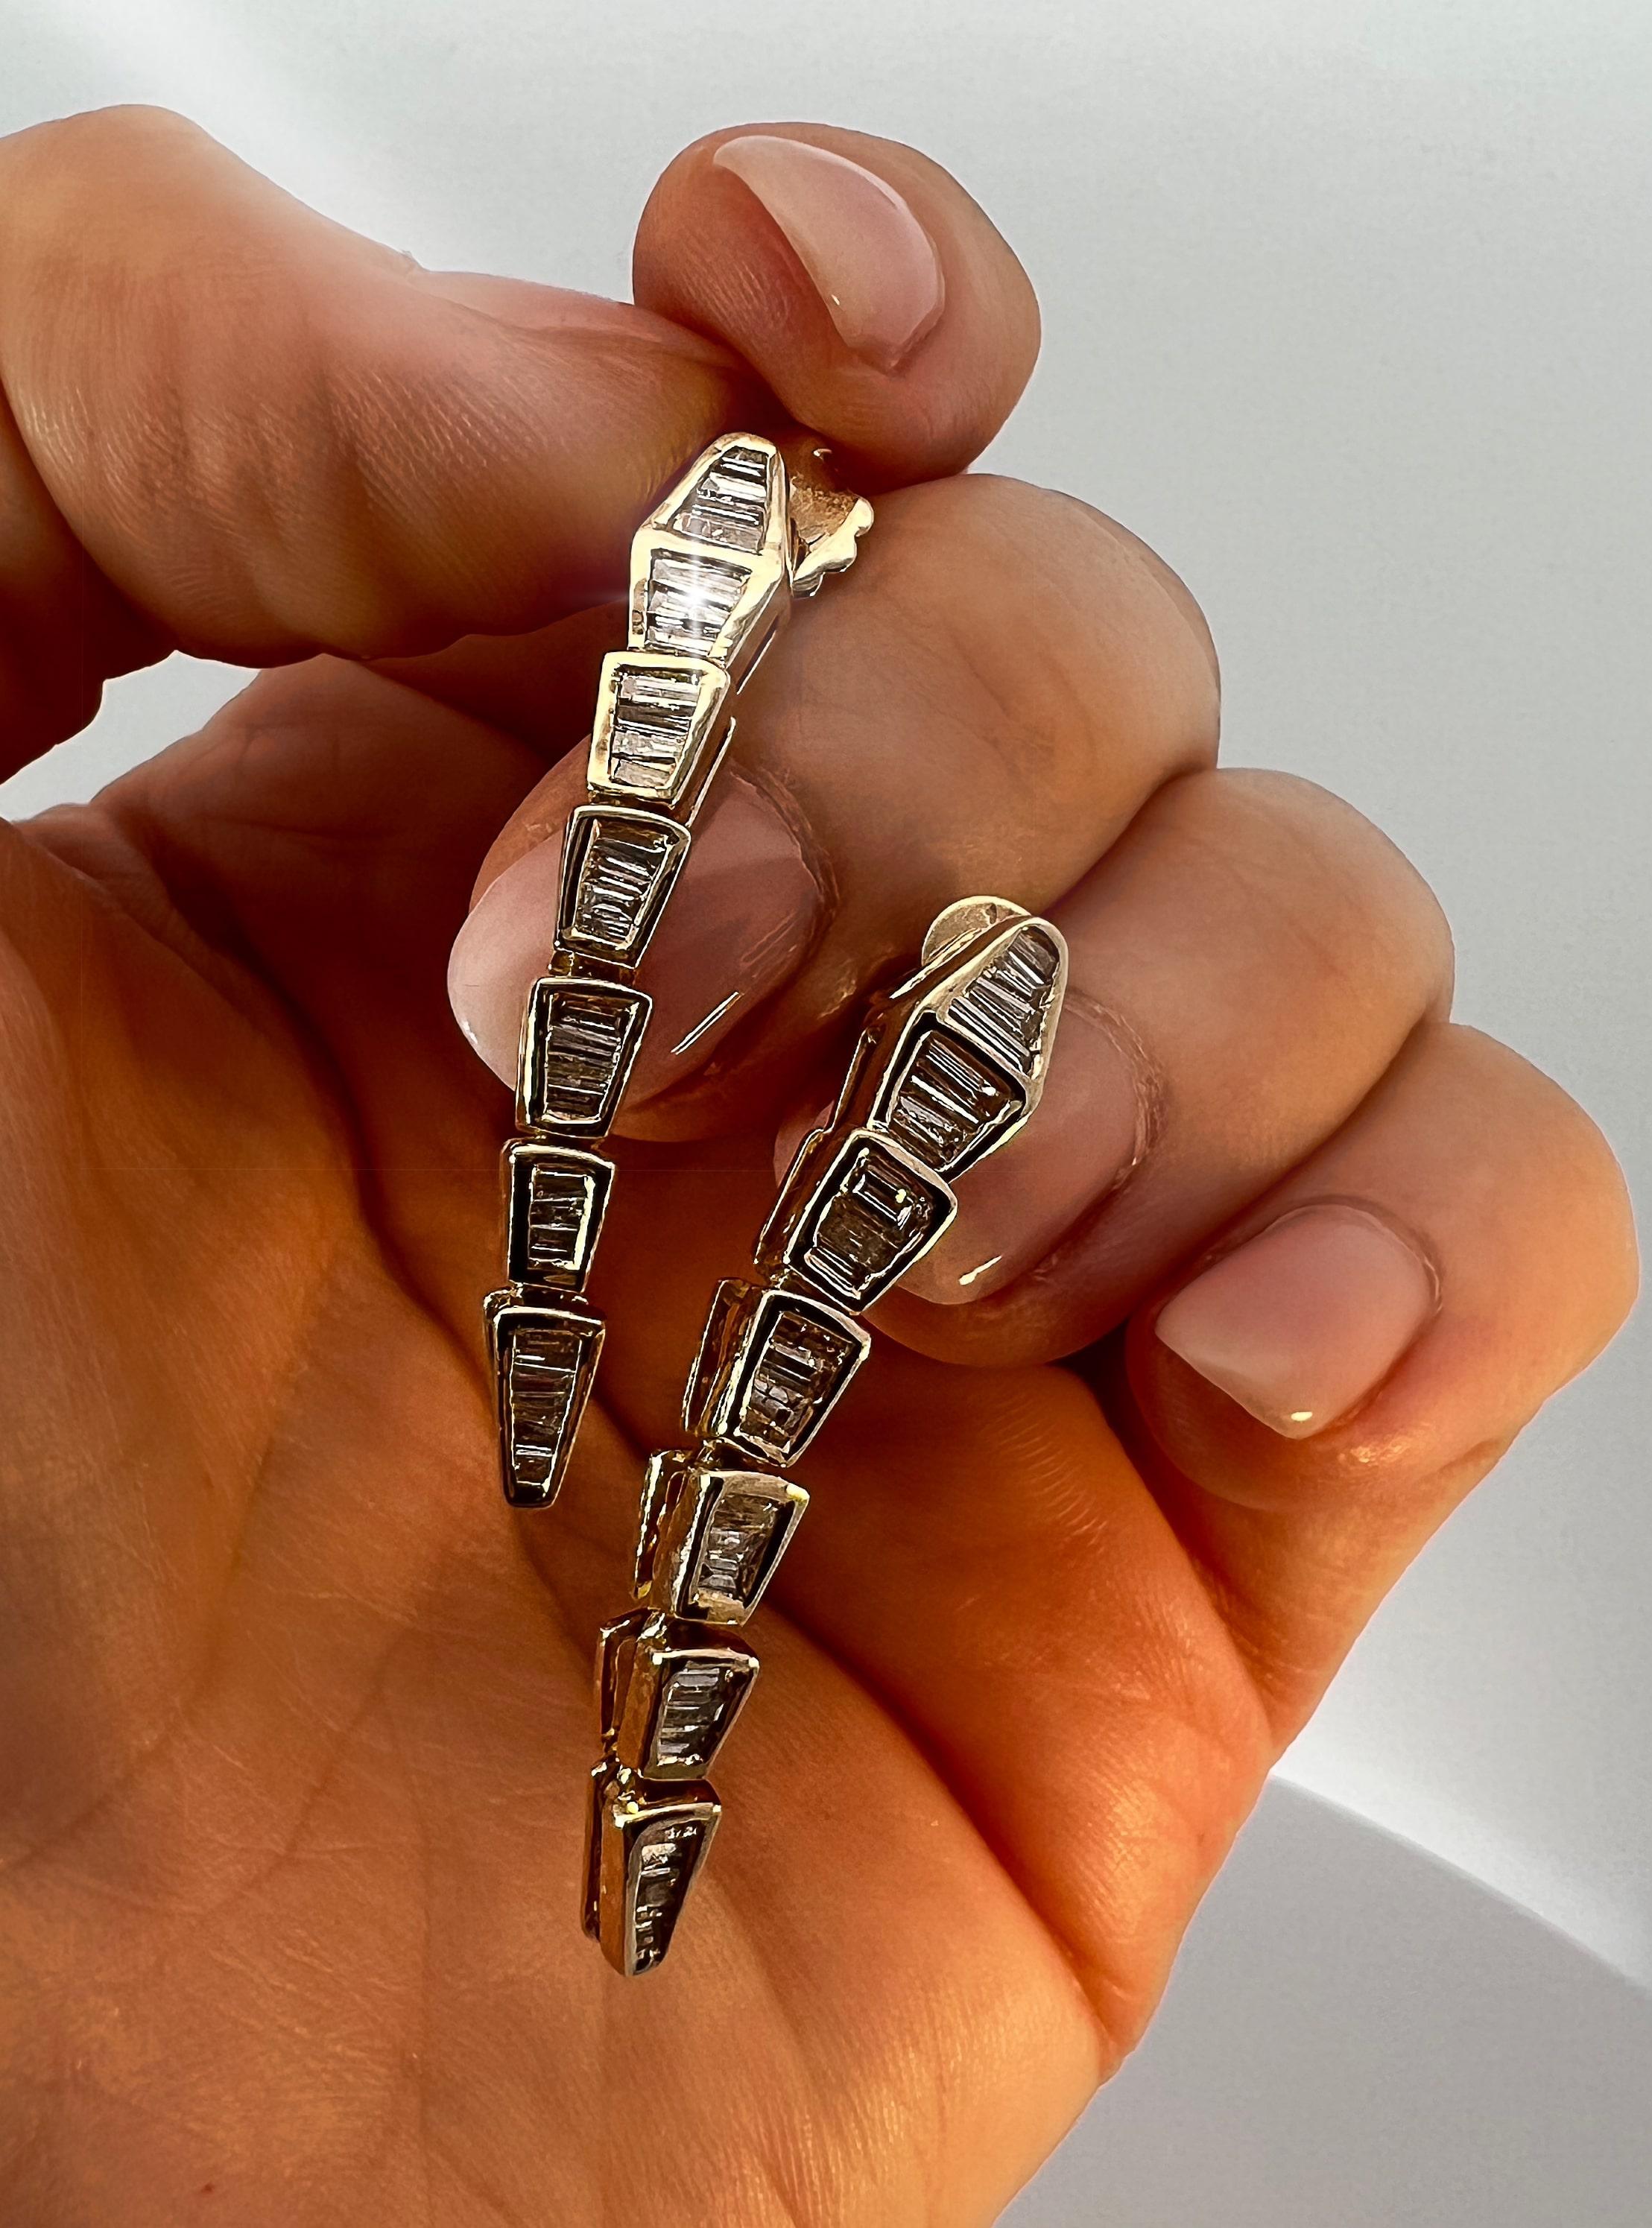 A captivating fusion of elegance and edge, it's a statement piece designed for those who dare to stand out.

Earring Information
Metal: 14K Gold
Color: Yellow Gold
Total Diamond Carats: 1.13ct
Diamond Cut: Baguette
Diamond Color: G/H
Diamond